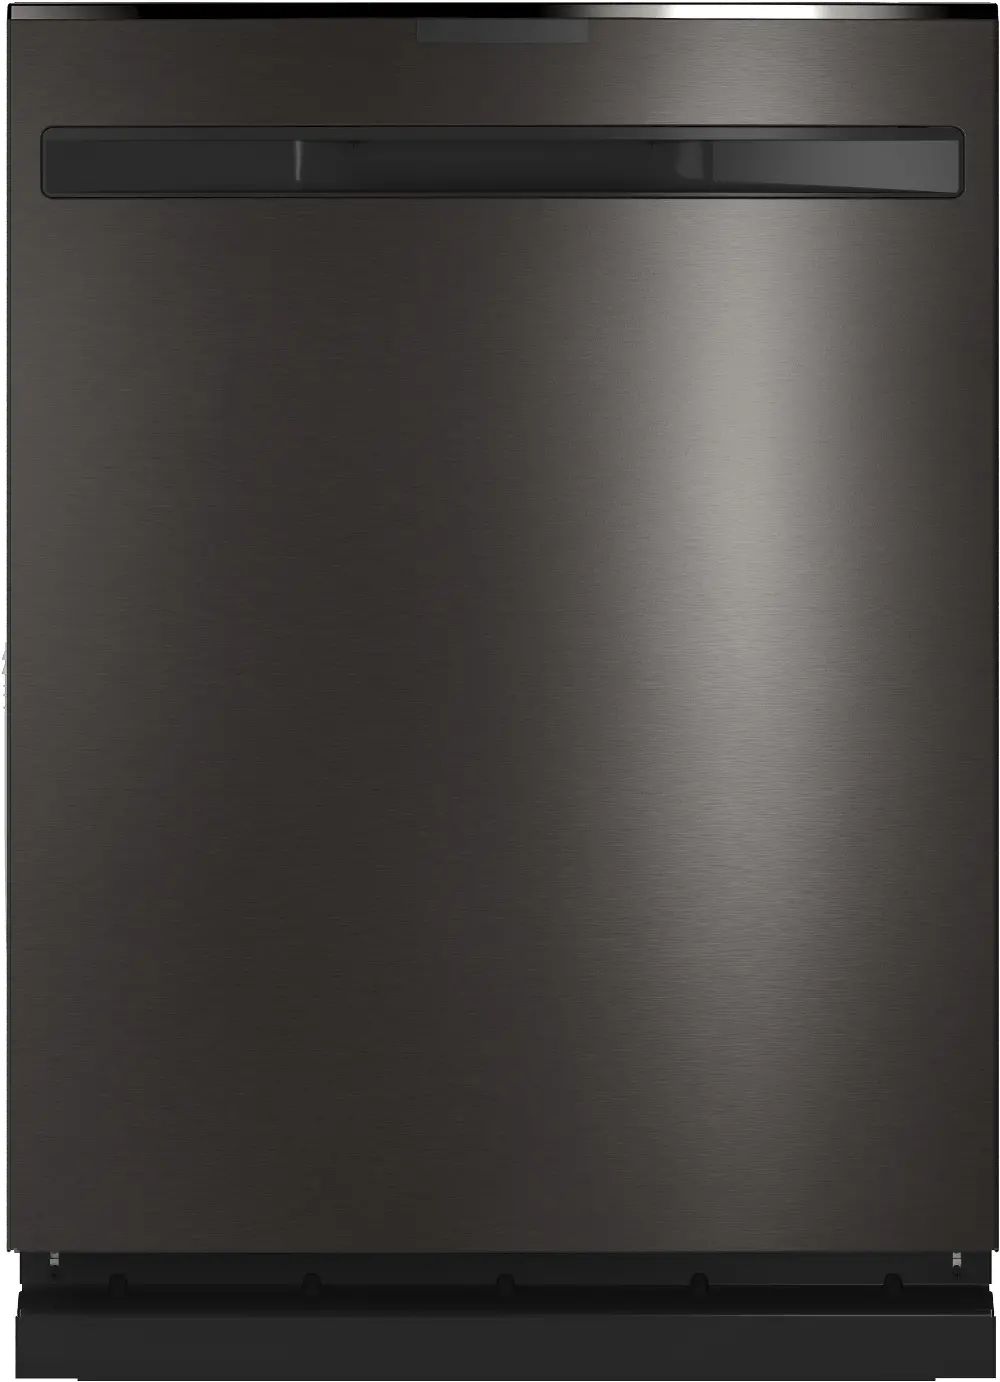 PDP715SBNTS GE Profile Dishwasher with Dry Boost - Black Stainless Steel-1